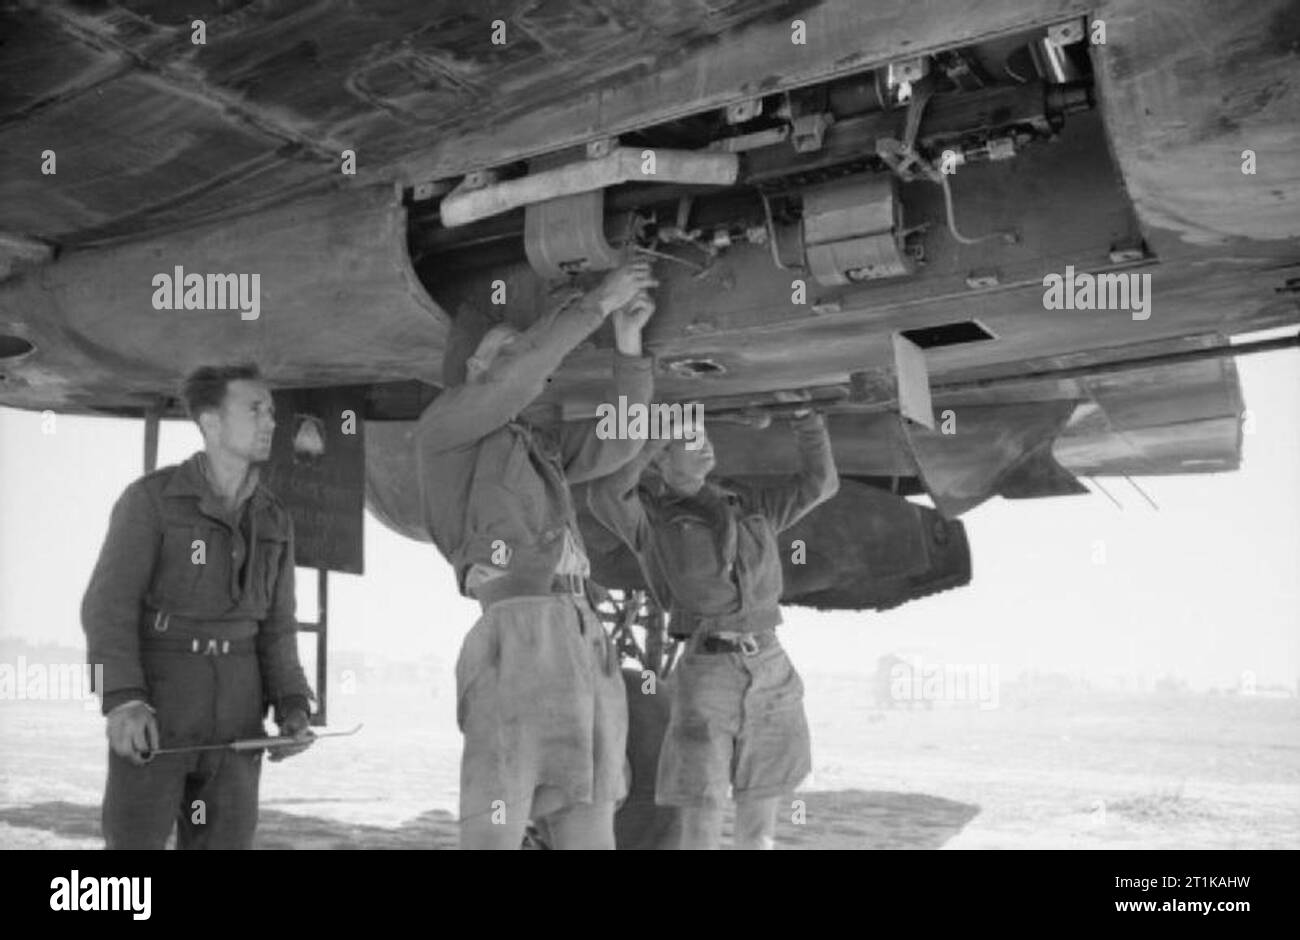 Royal Air Force Operations in the Middle East and North Africa, 1939-1943. Armourers of No. 89 Squadron RAF servicing the 20mm Hispano cannons of a Bristol Beaufighter Mark VIF at Castel Benito, Libya. Stock Photo